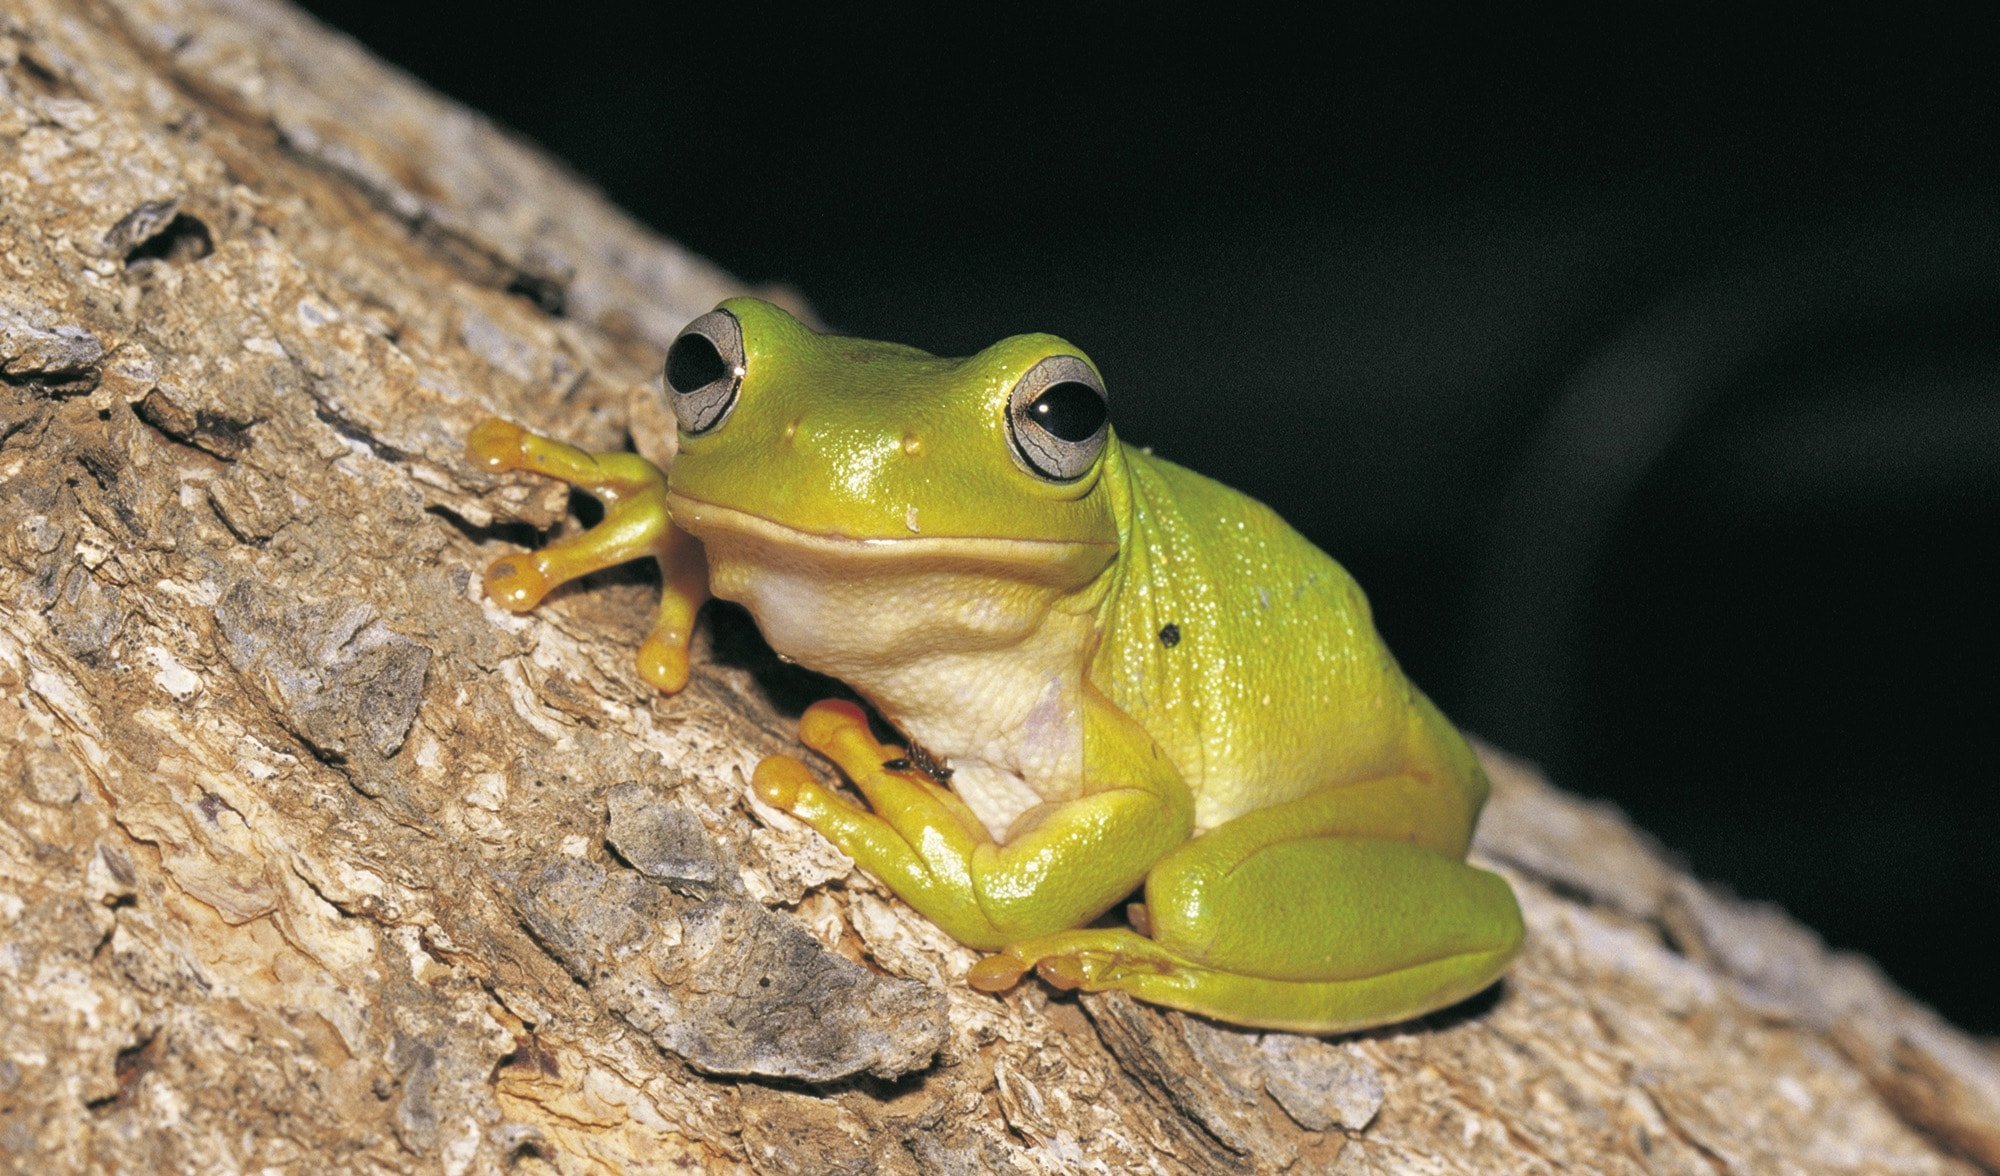 where have all the green frogs gone?